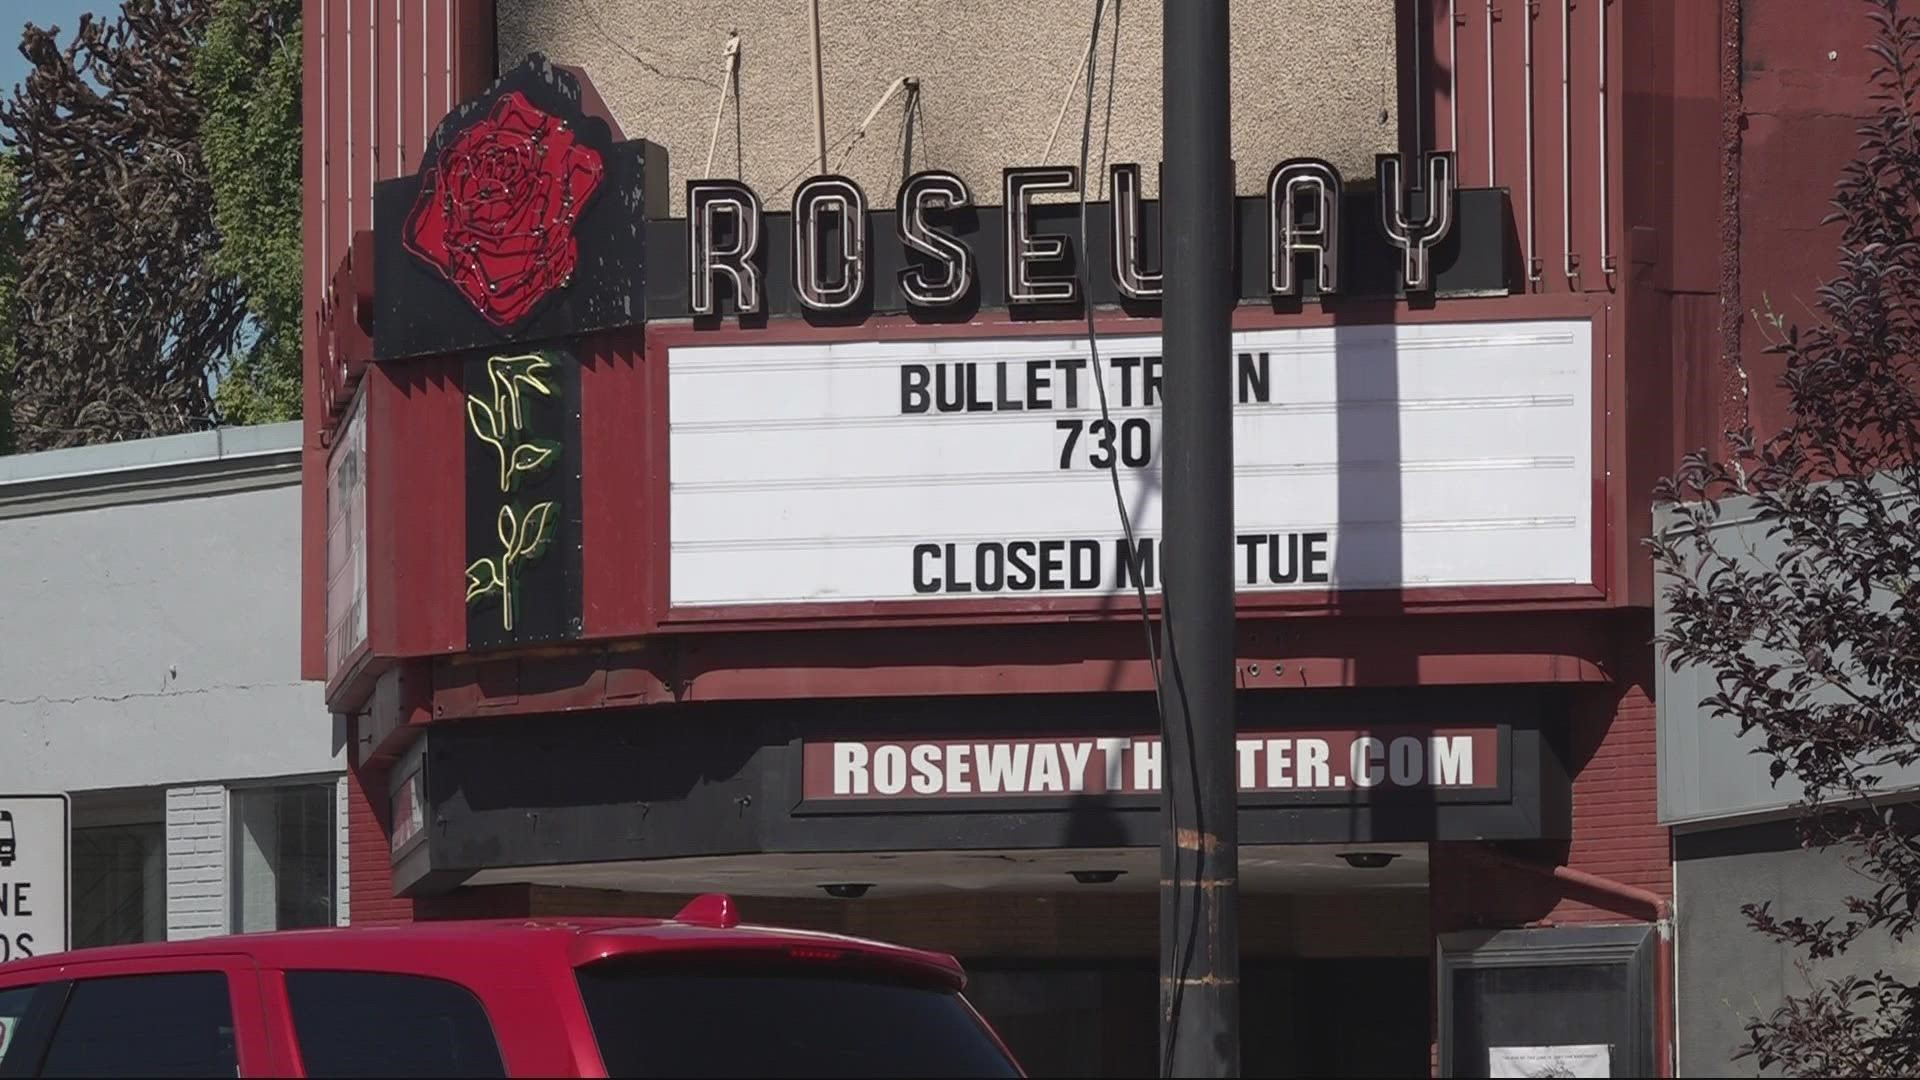 After nearly 100 years in the same building, same location, neighbors say they're sad to see the venerable Roseway Theater go out like this.